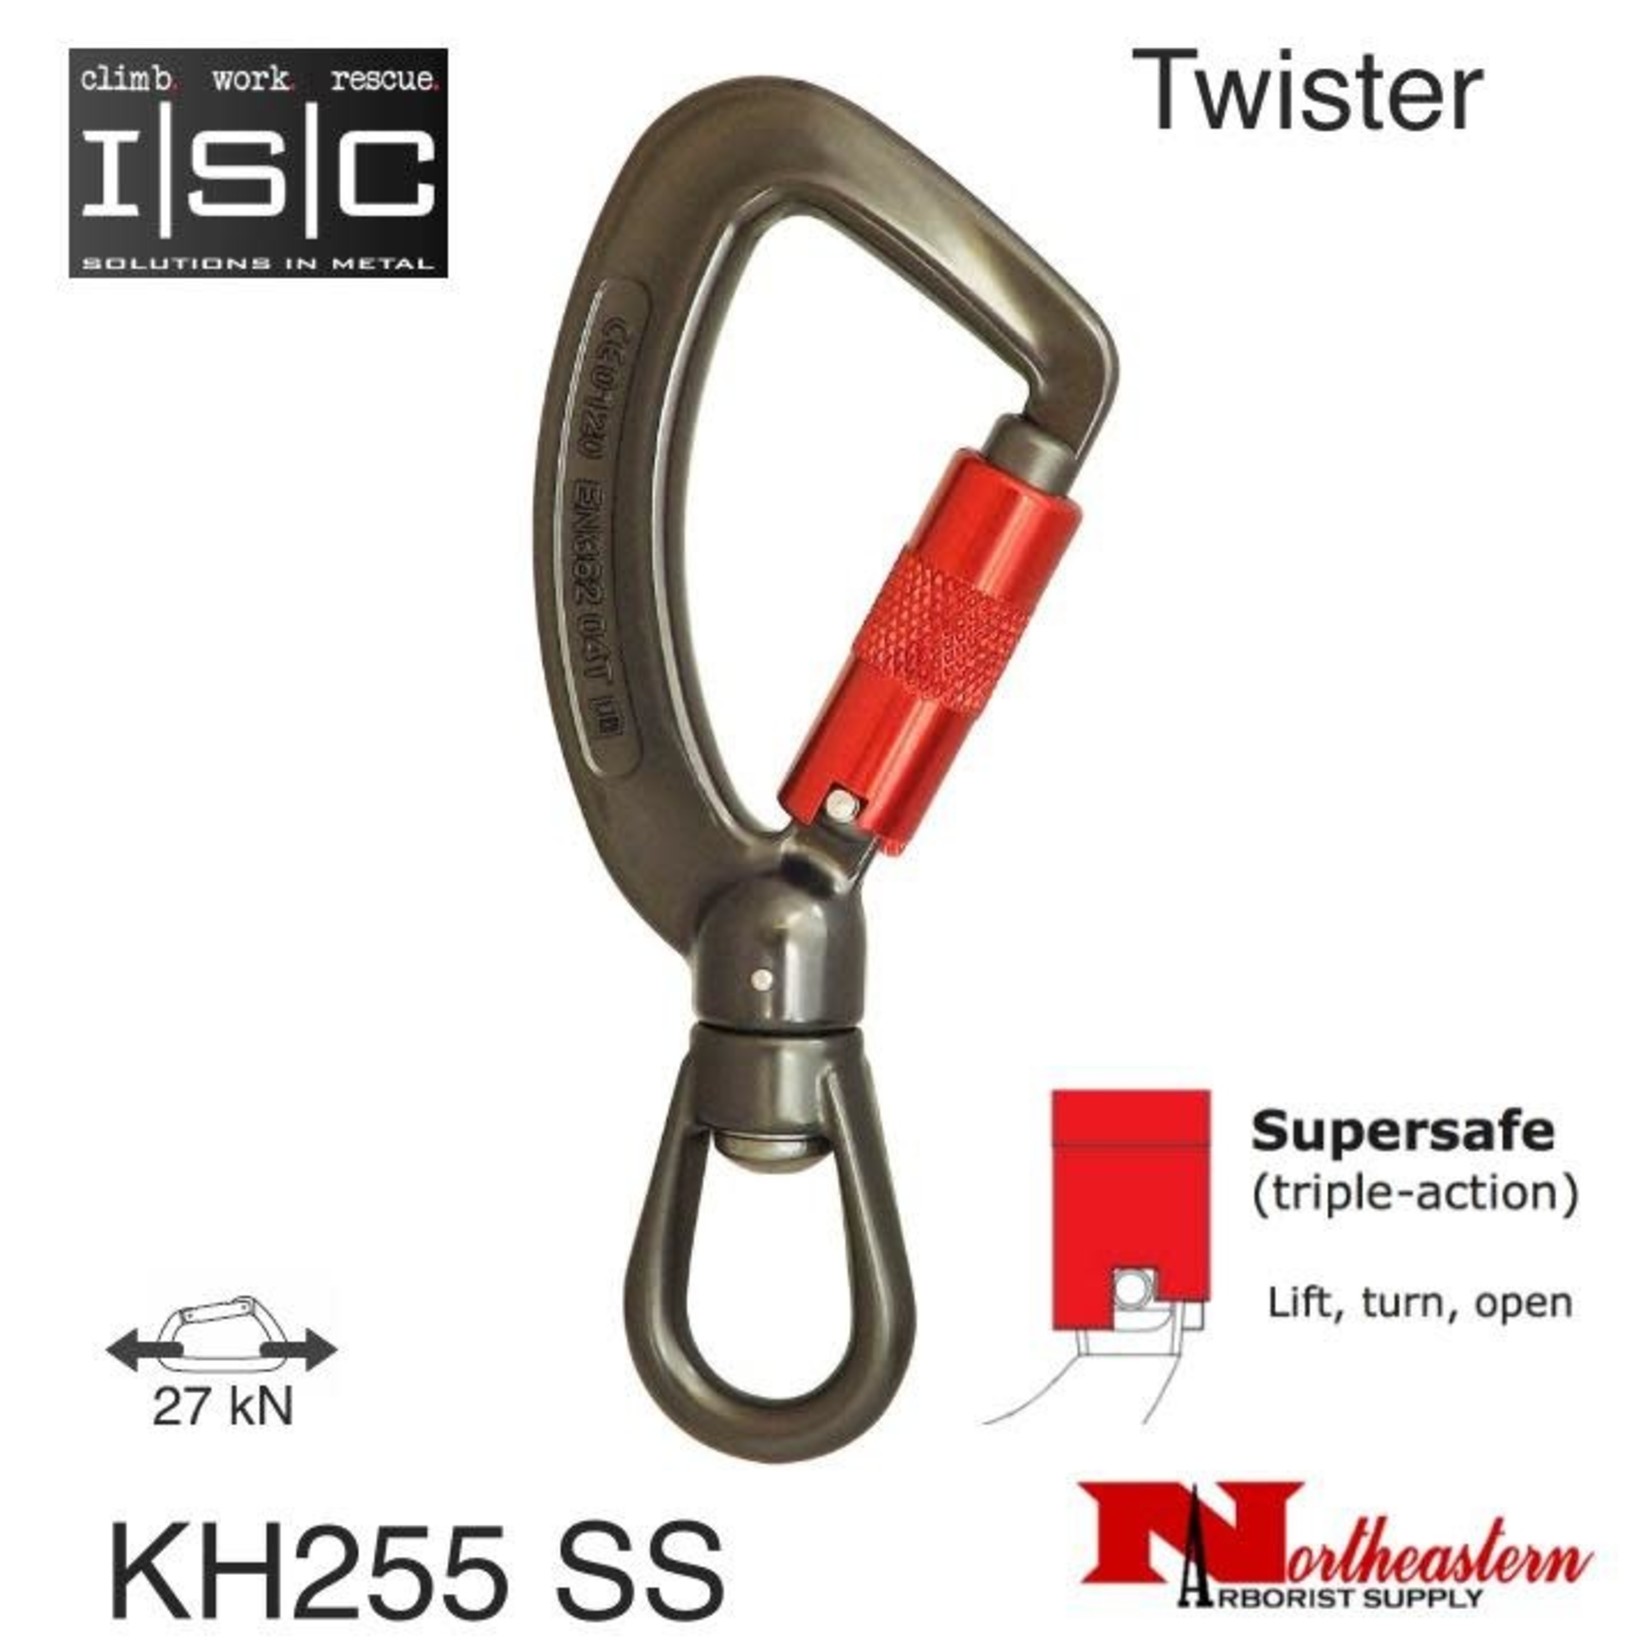 ISC Carabiner, Aluminum with Swivel Eye, Supersafe, 27 kN